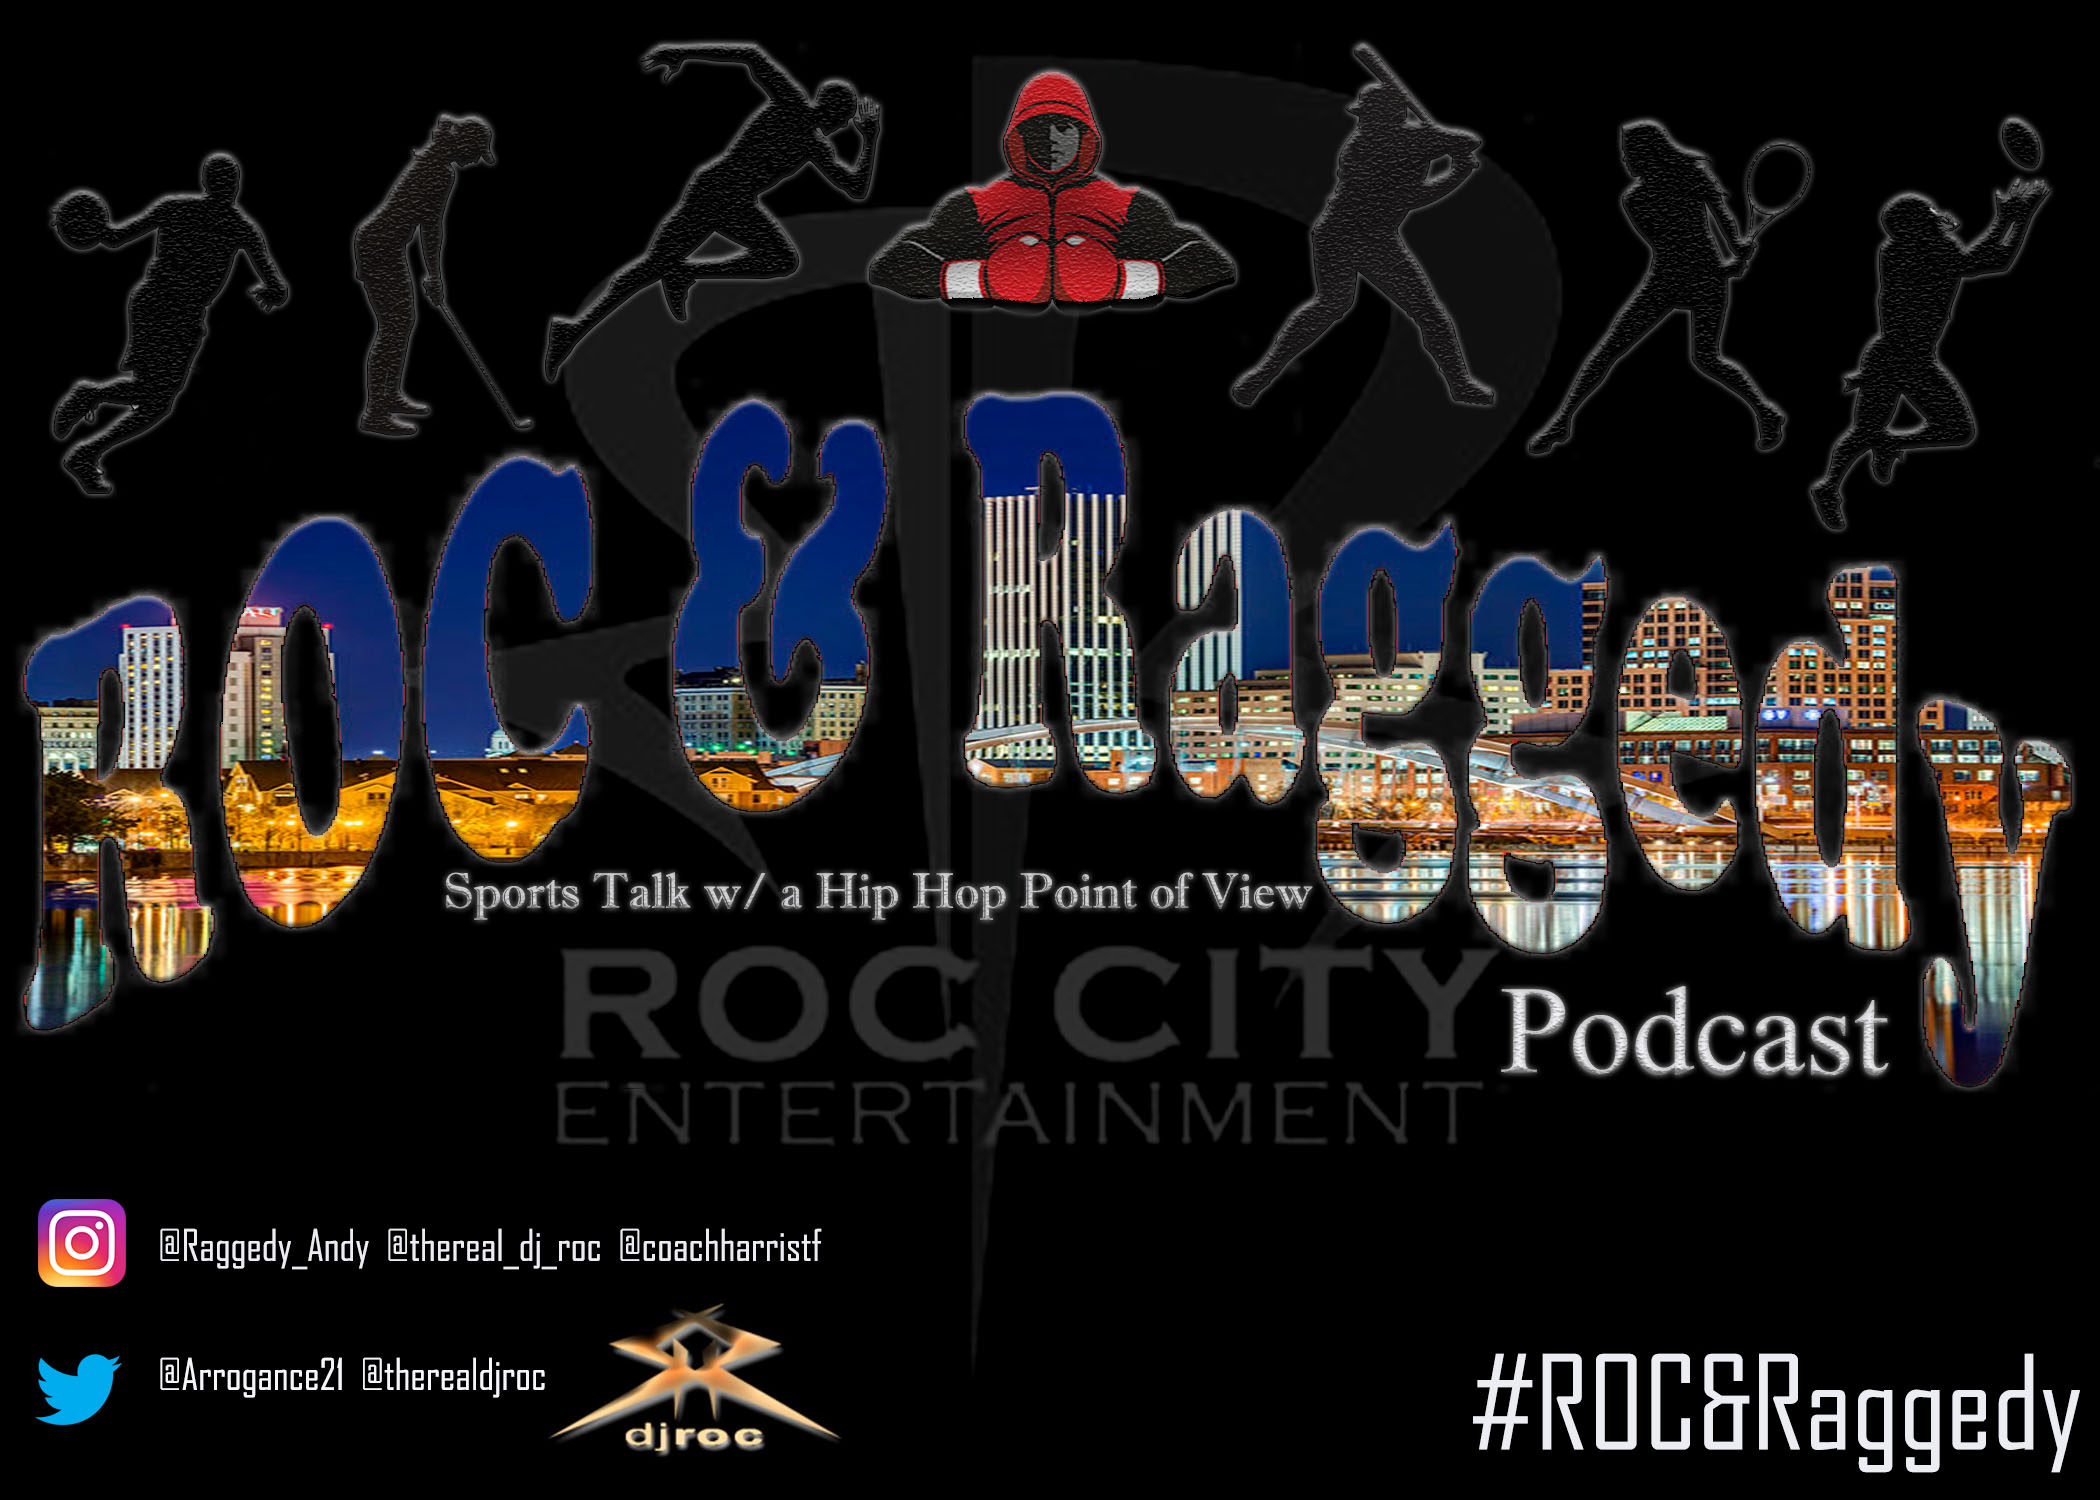 The ROC & Raggedy Podcast - Ep. 07 - 05-29-19